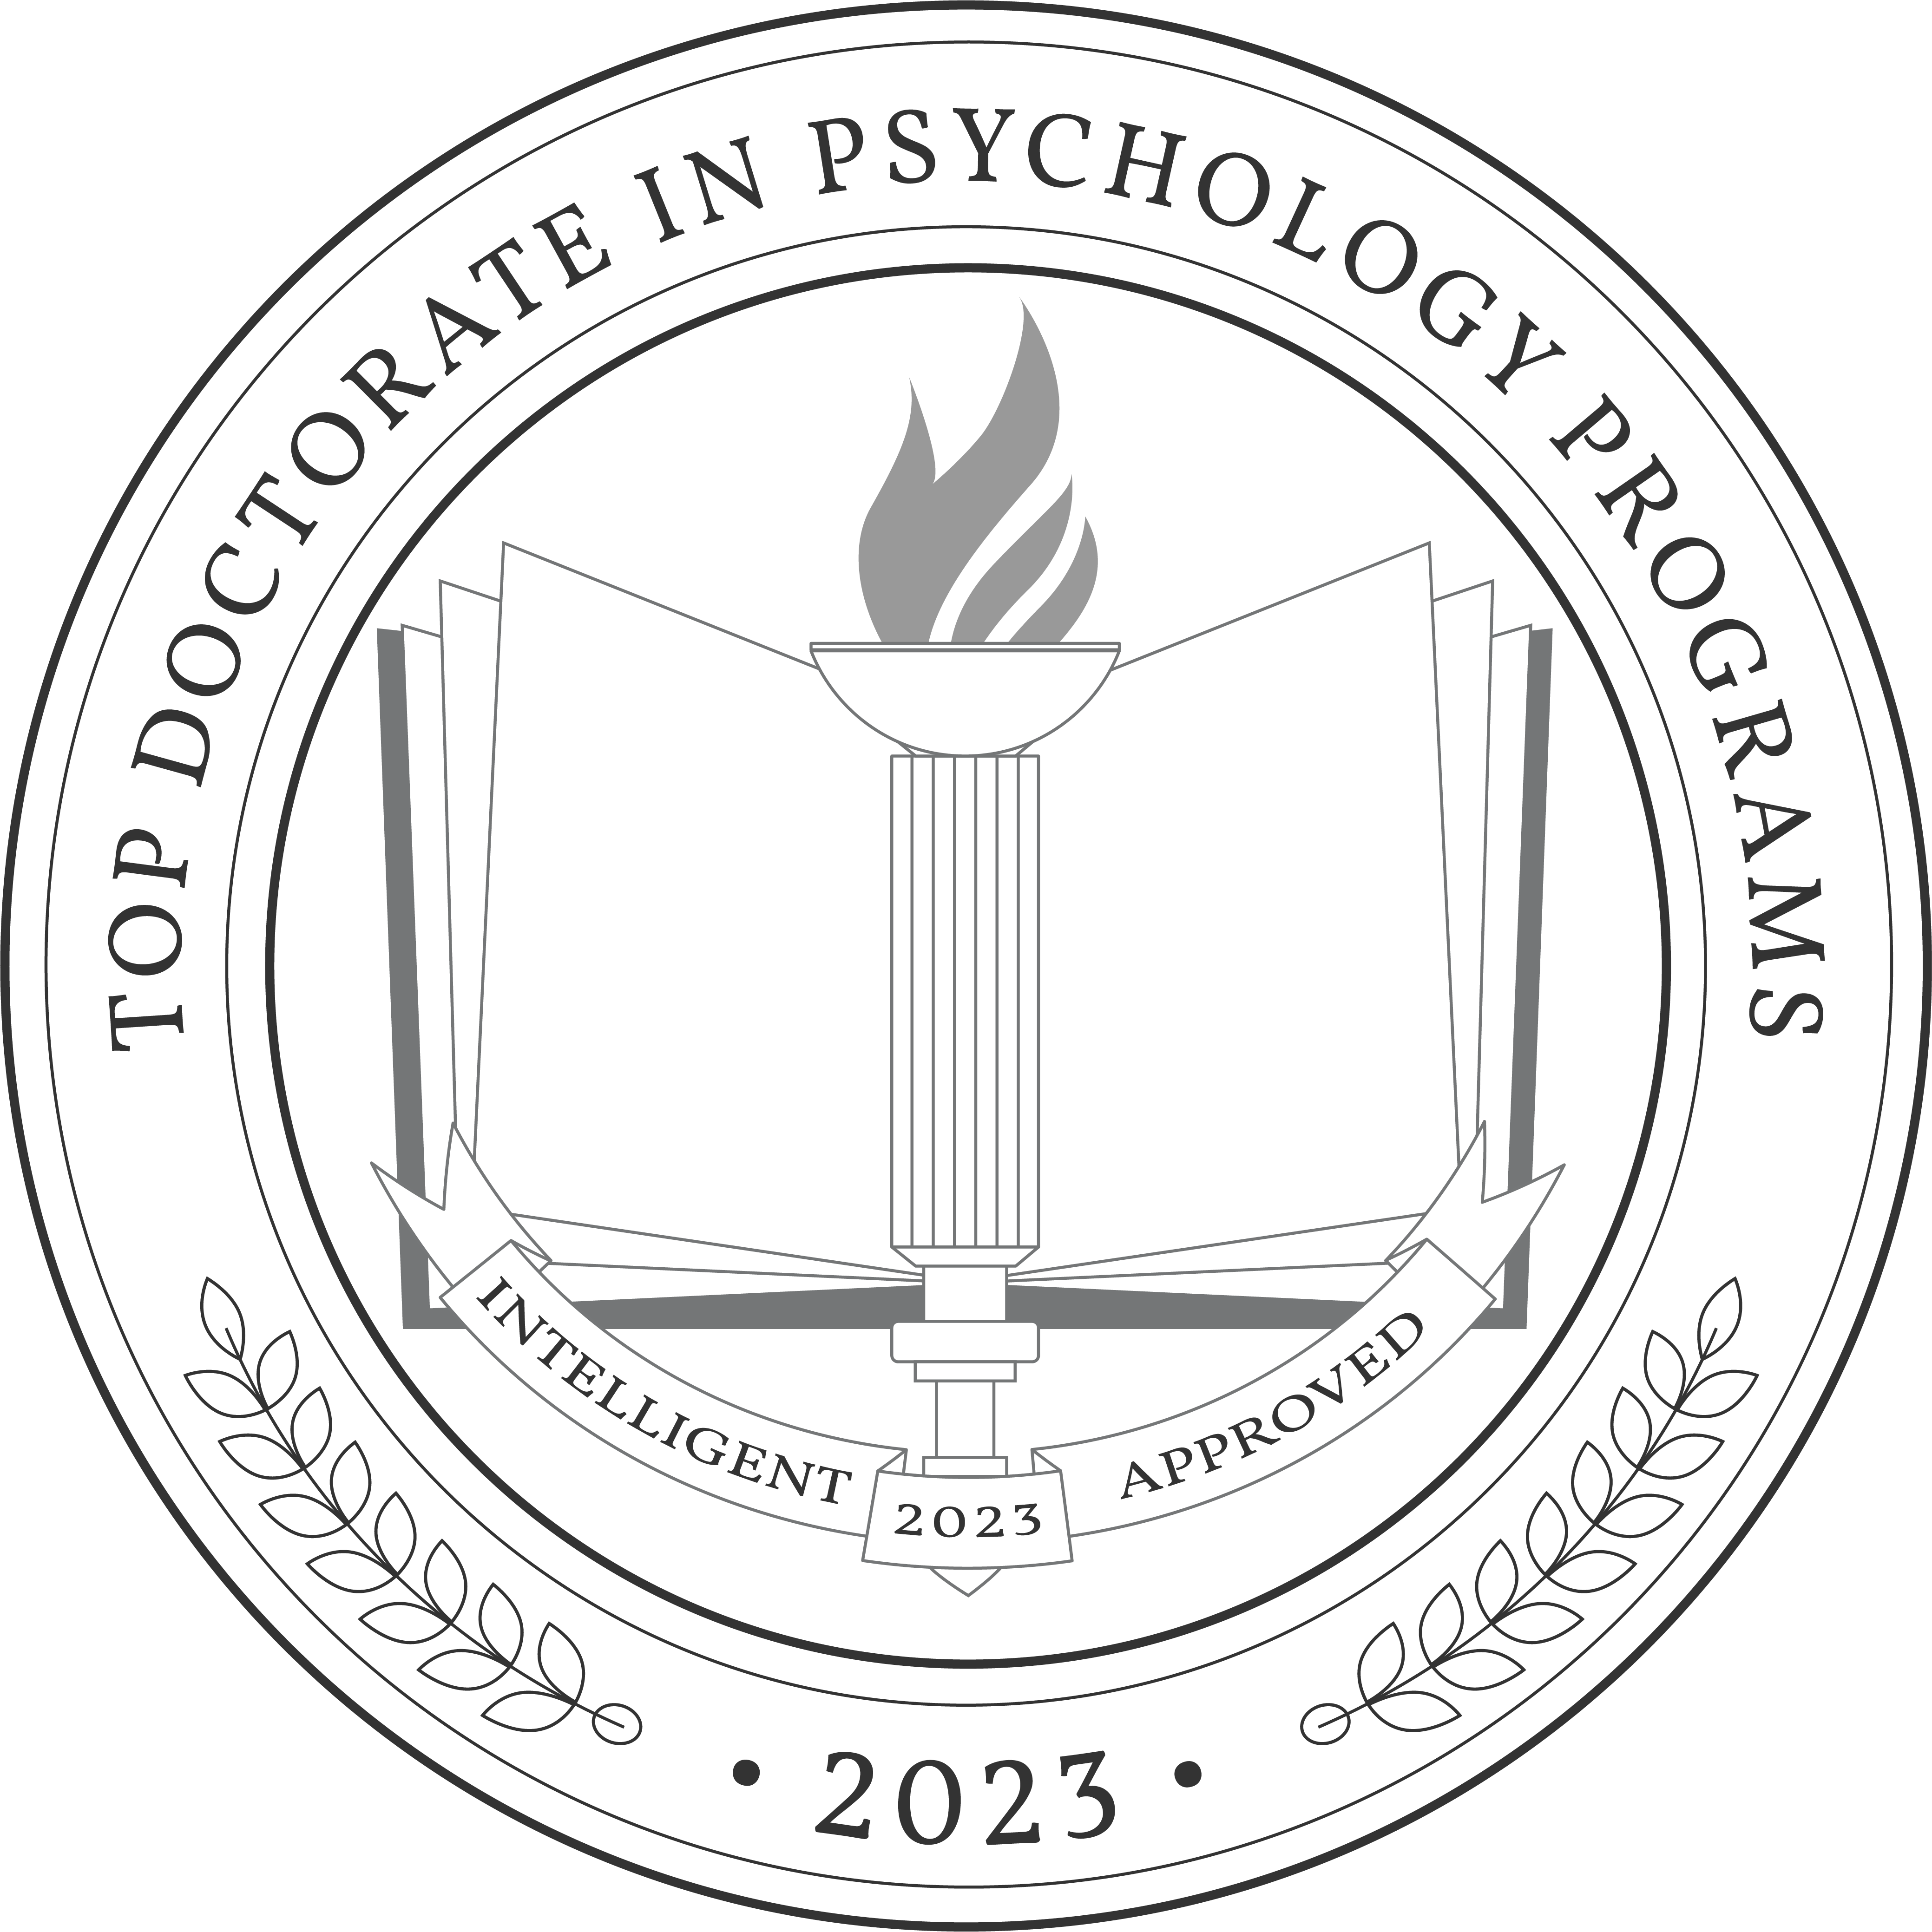 doctorate in education and child psychology